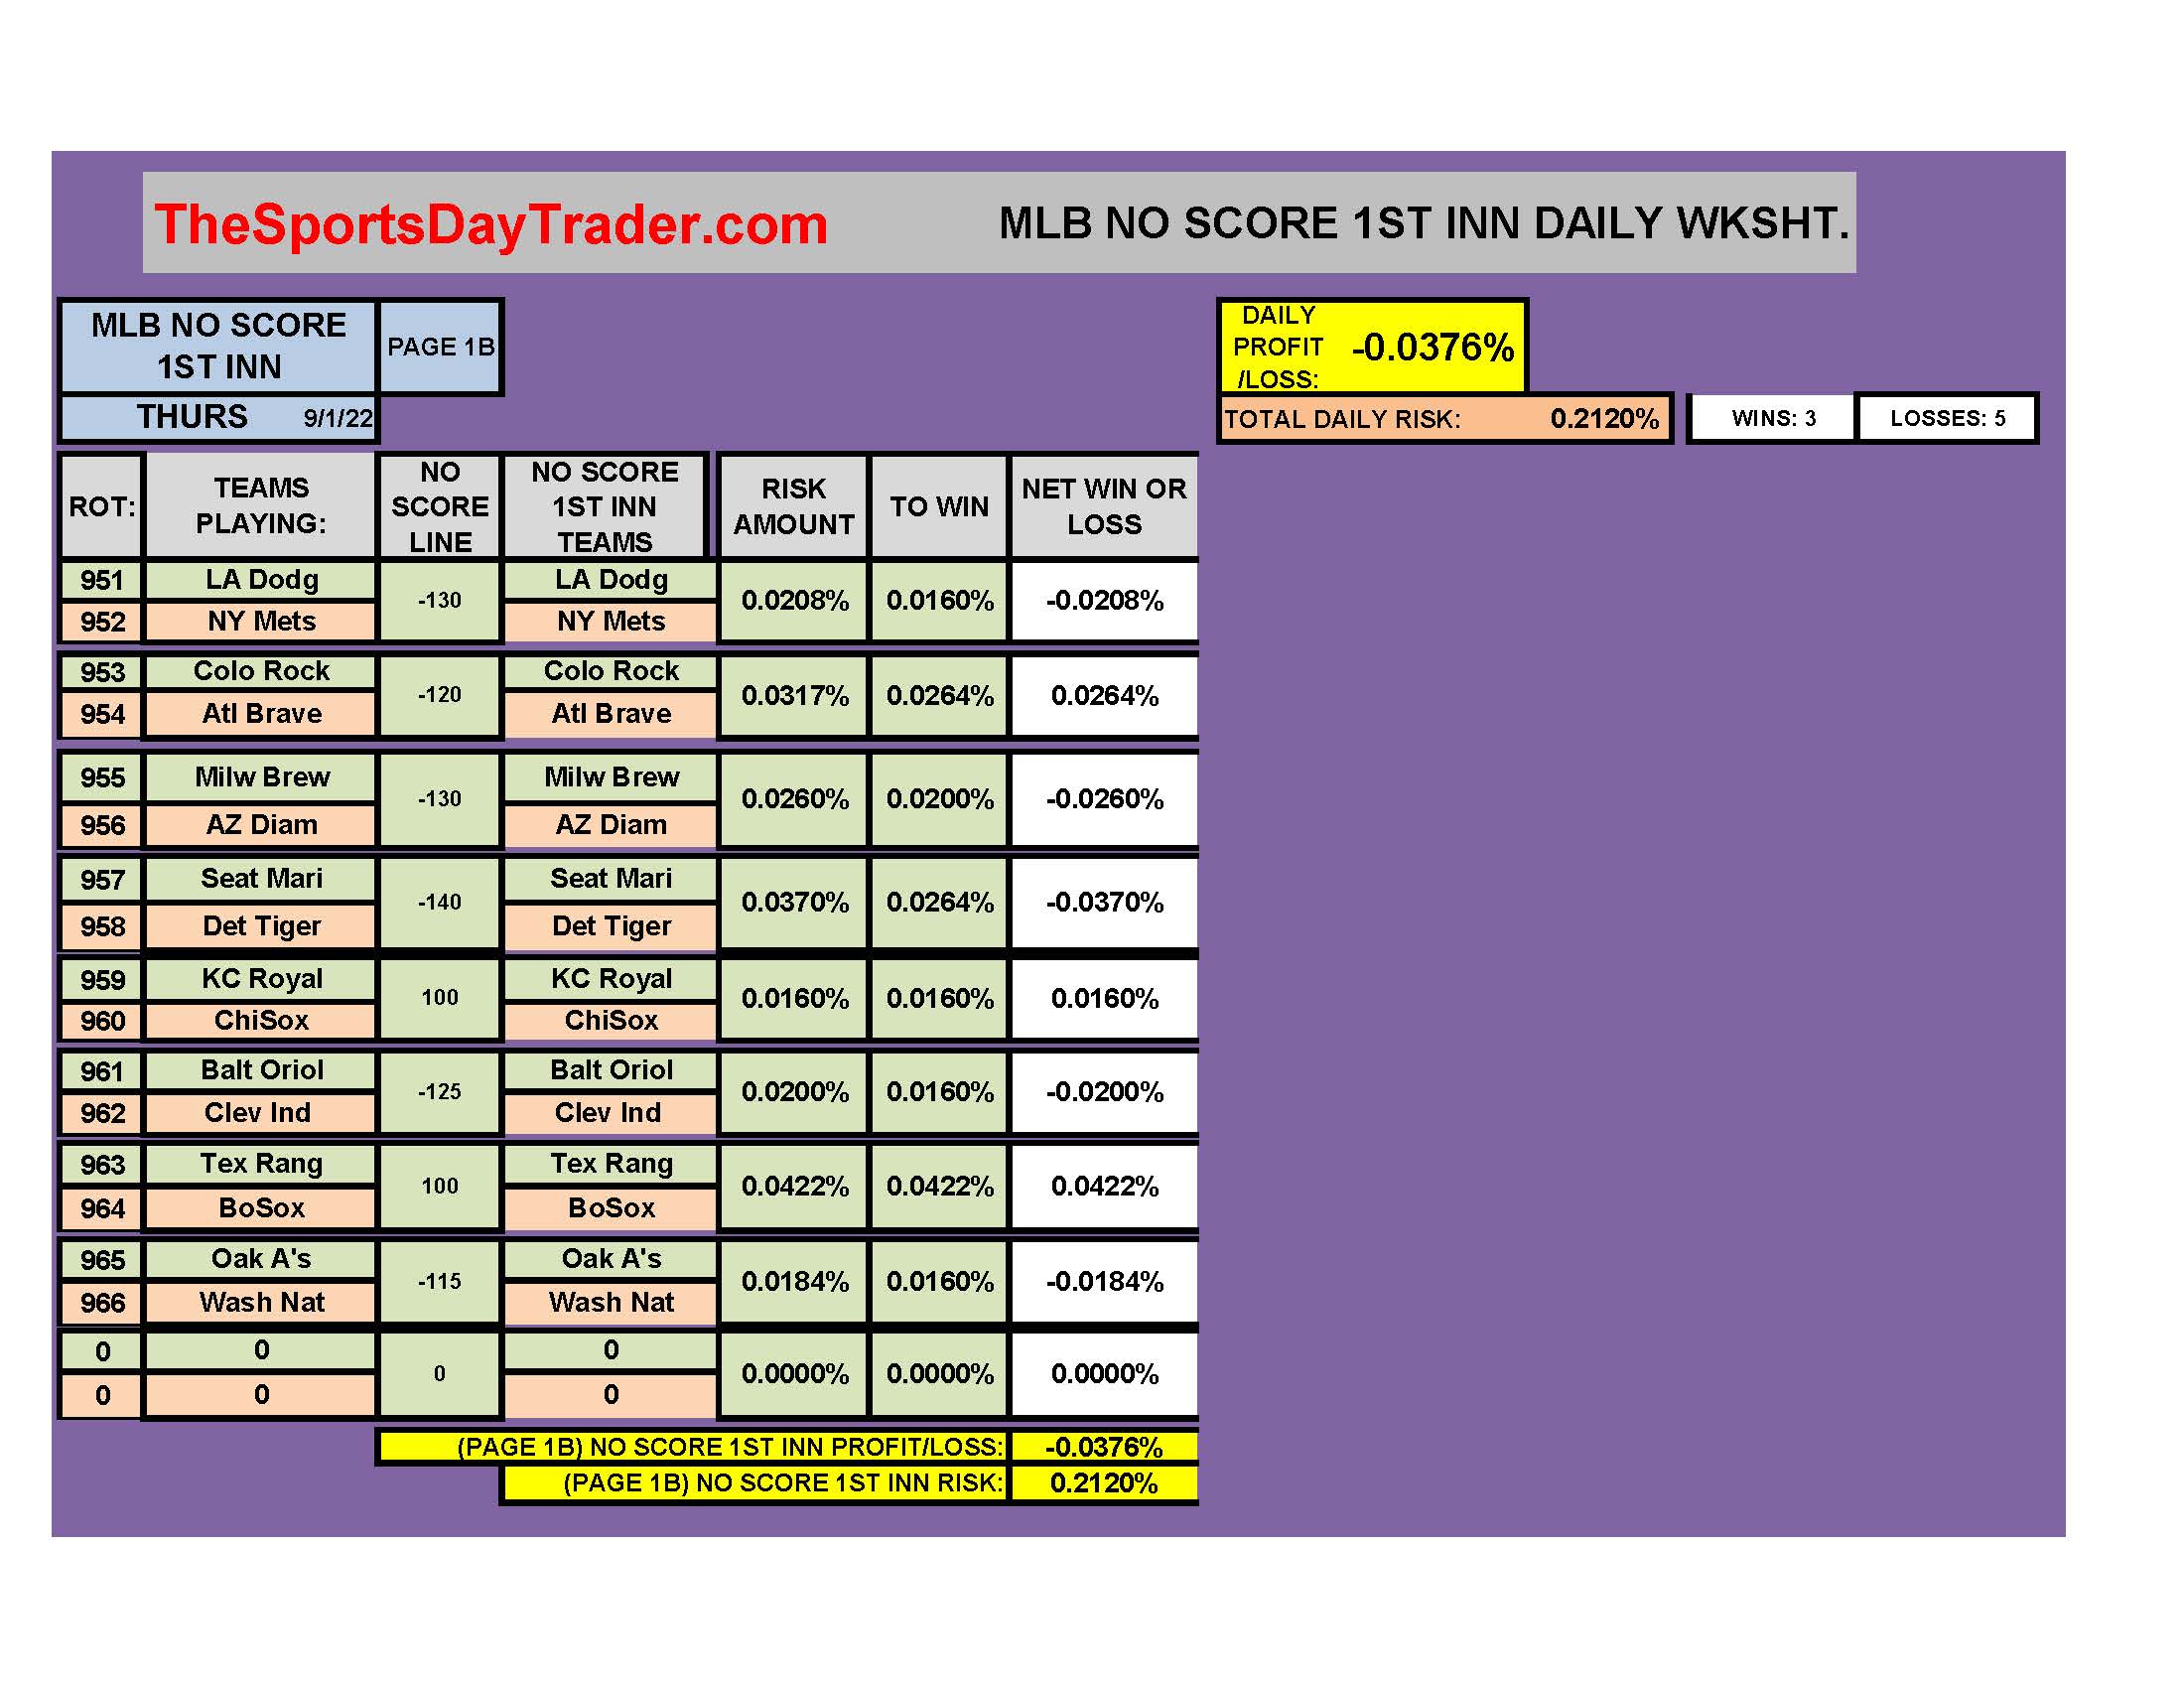 MLB 9/1/22 NO SCORE 1ST INNING DAILY RESULTS